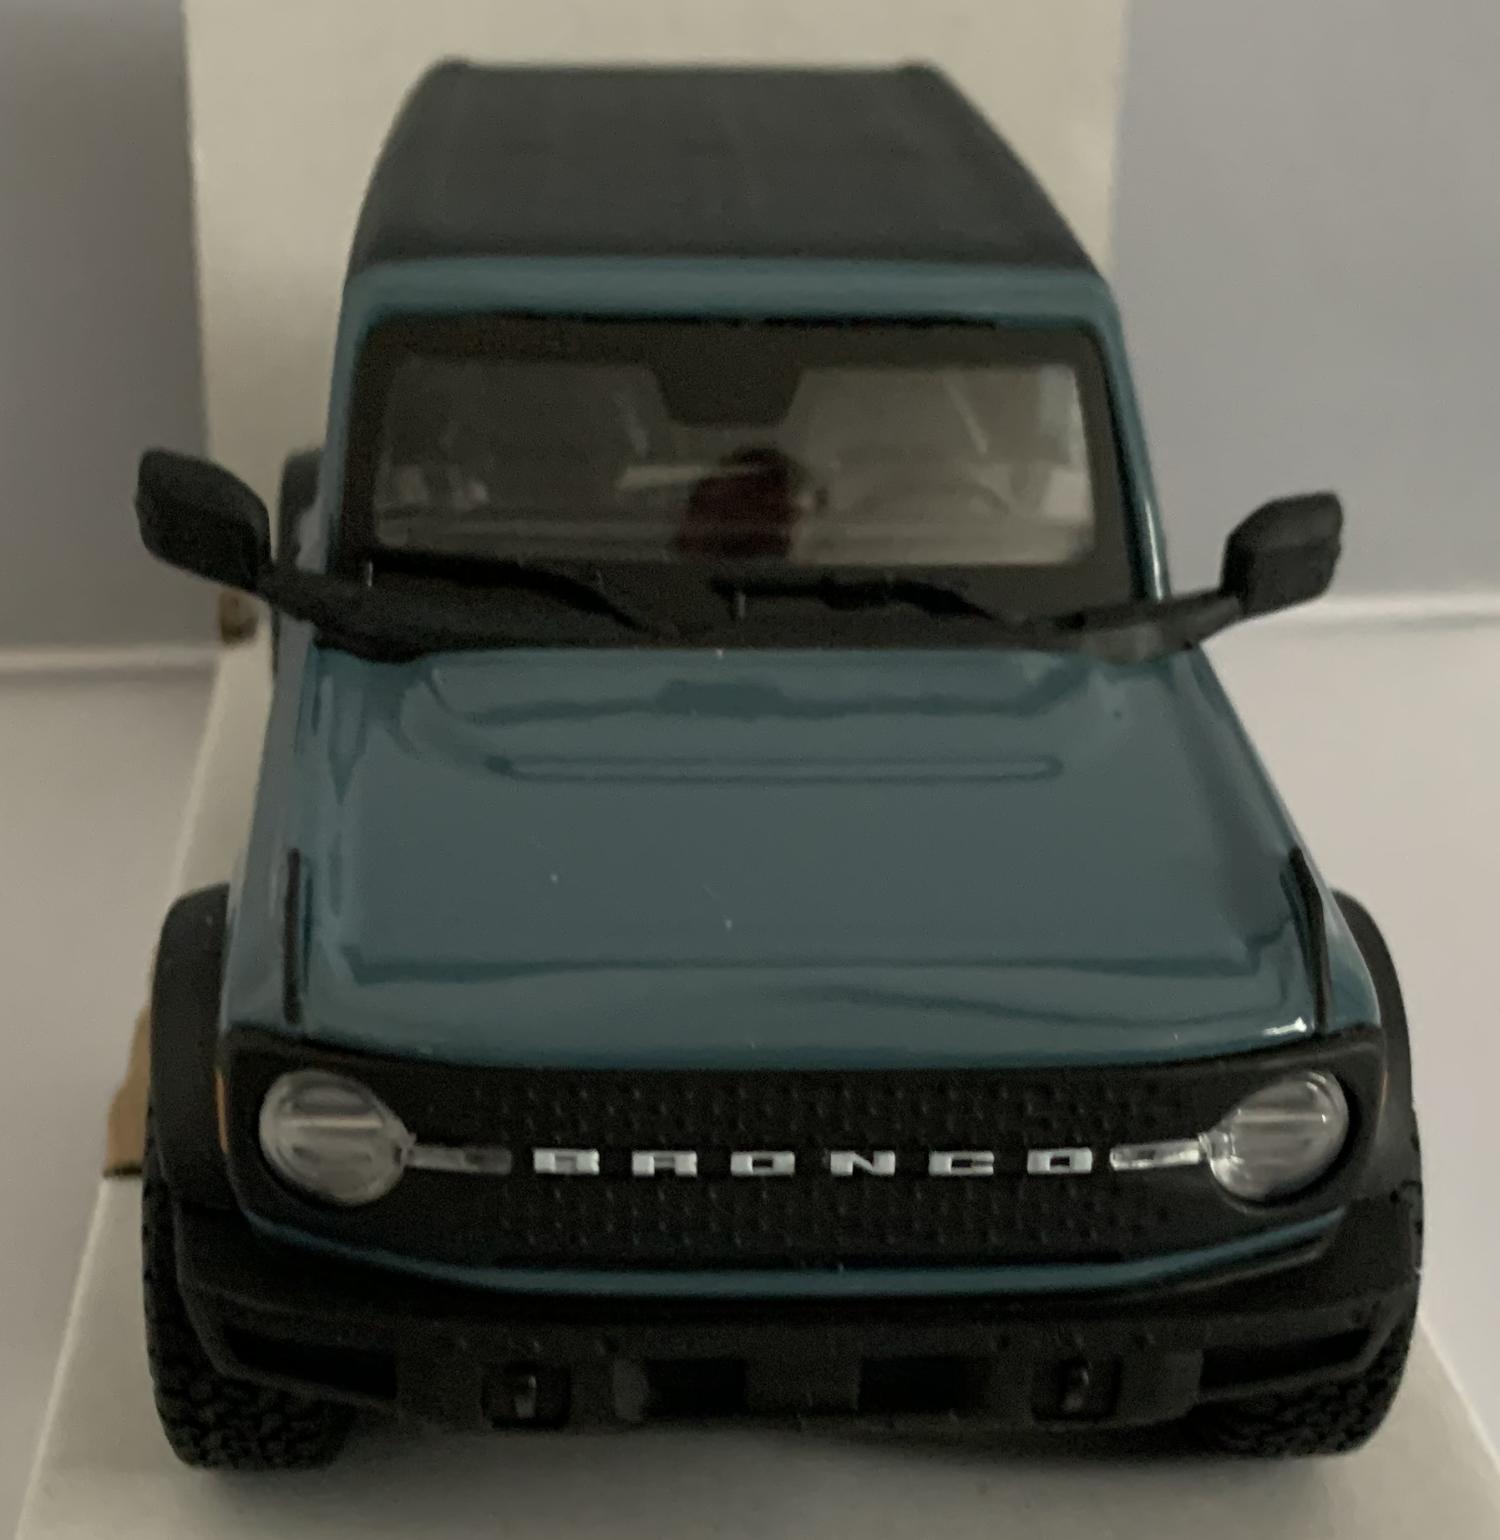 Ford Bronco Badlands 2021 in blue 1:24 scale model from Maisto